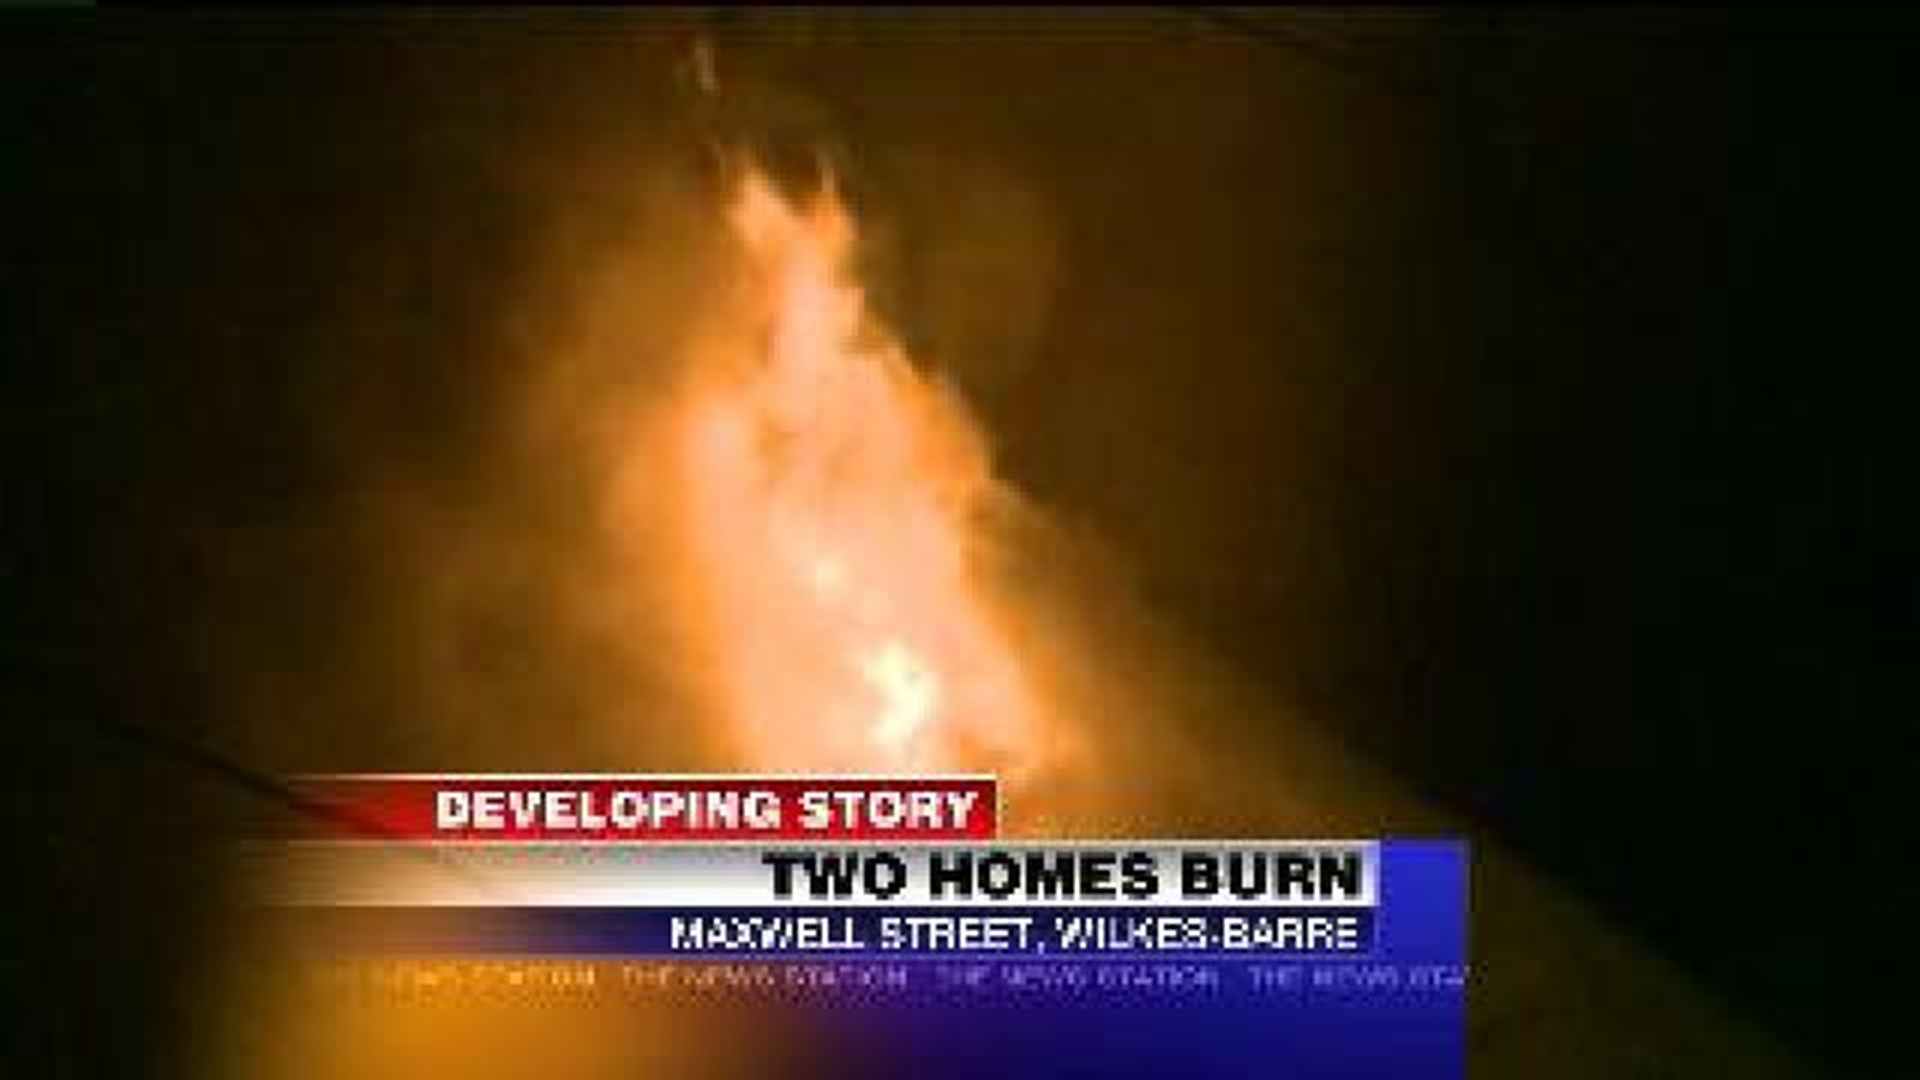 Firefighters Battle Flames in Two Homes